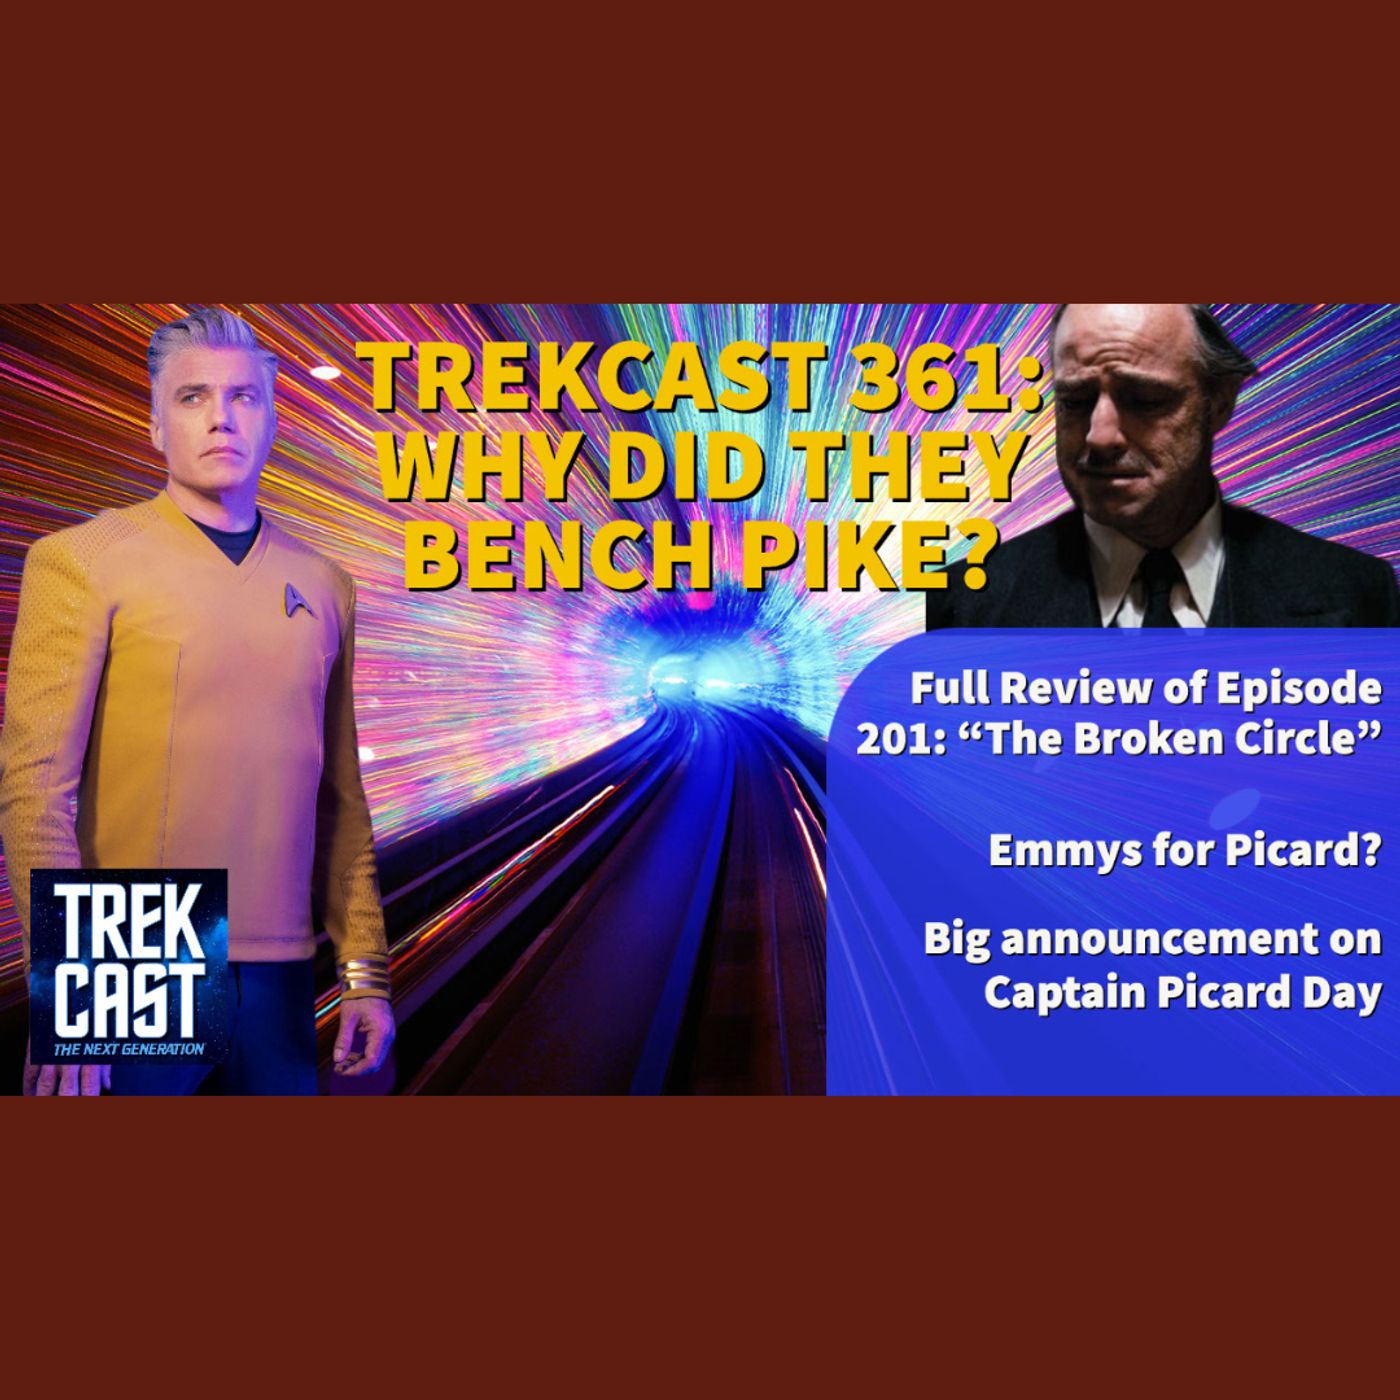 Trekcast 361: Why did they bench Pike? Picard movie in the works?!? Emmys for Star Trek actors, plus a review of Strange New Worlds 201